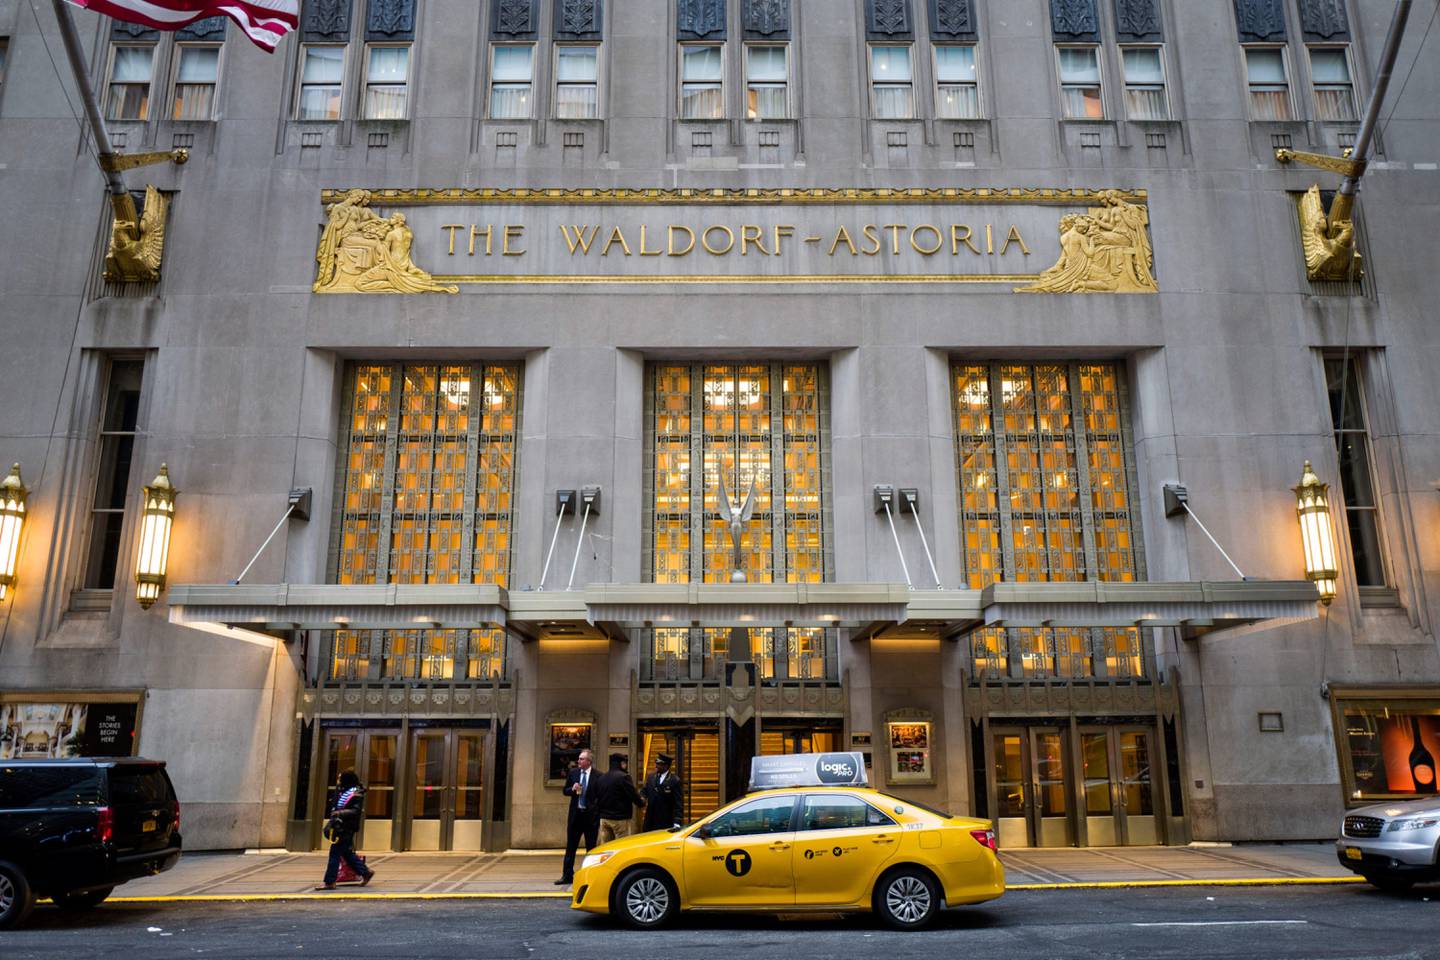 NEW YORK, NY - FEBRUARY 28: An exterior view of the Waldorf Astoria Hotel, February 28, 2017 in New York City.